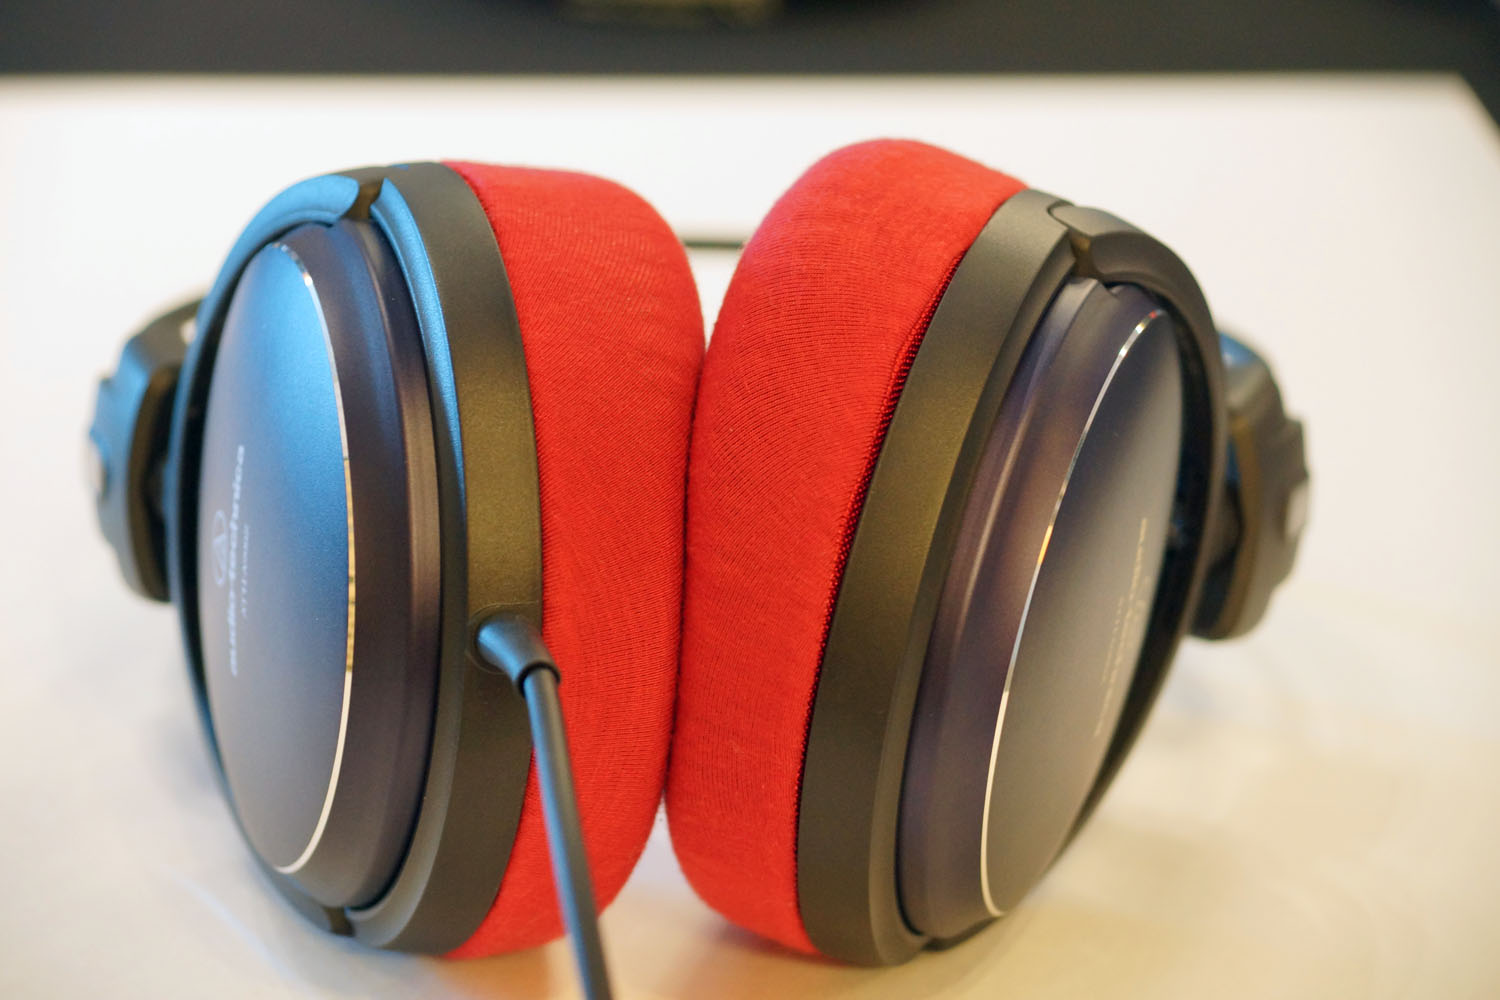 audio-technica ATH-A900Z ear pads compatible with mimimamo